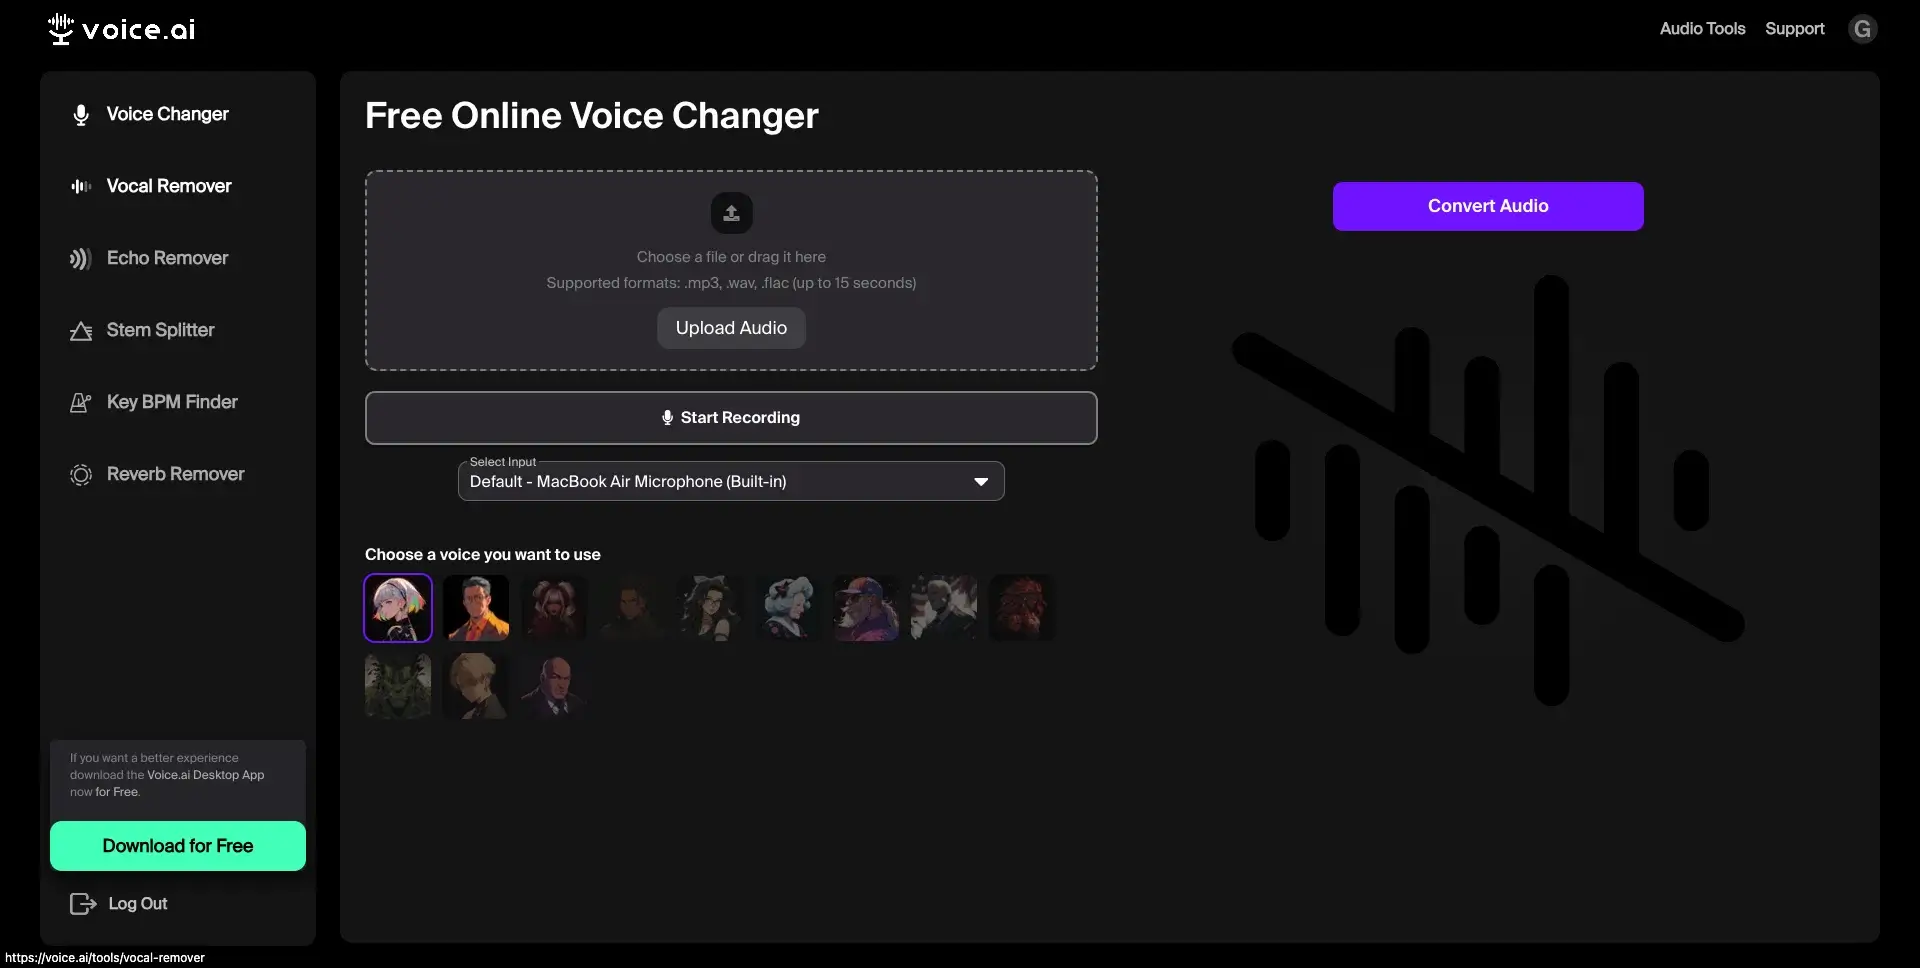 Voice Changer Results